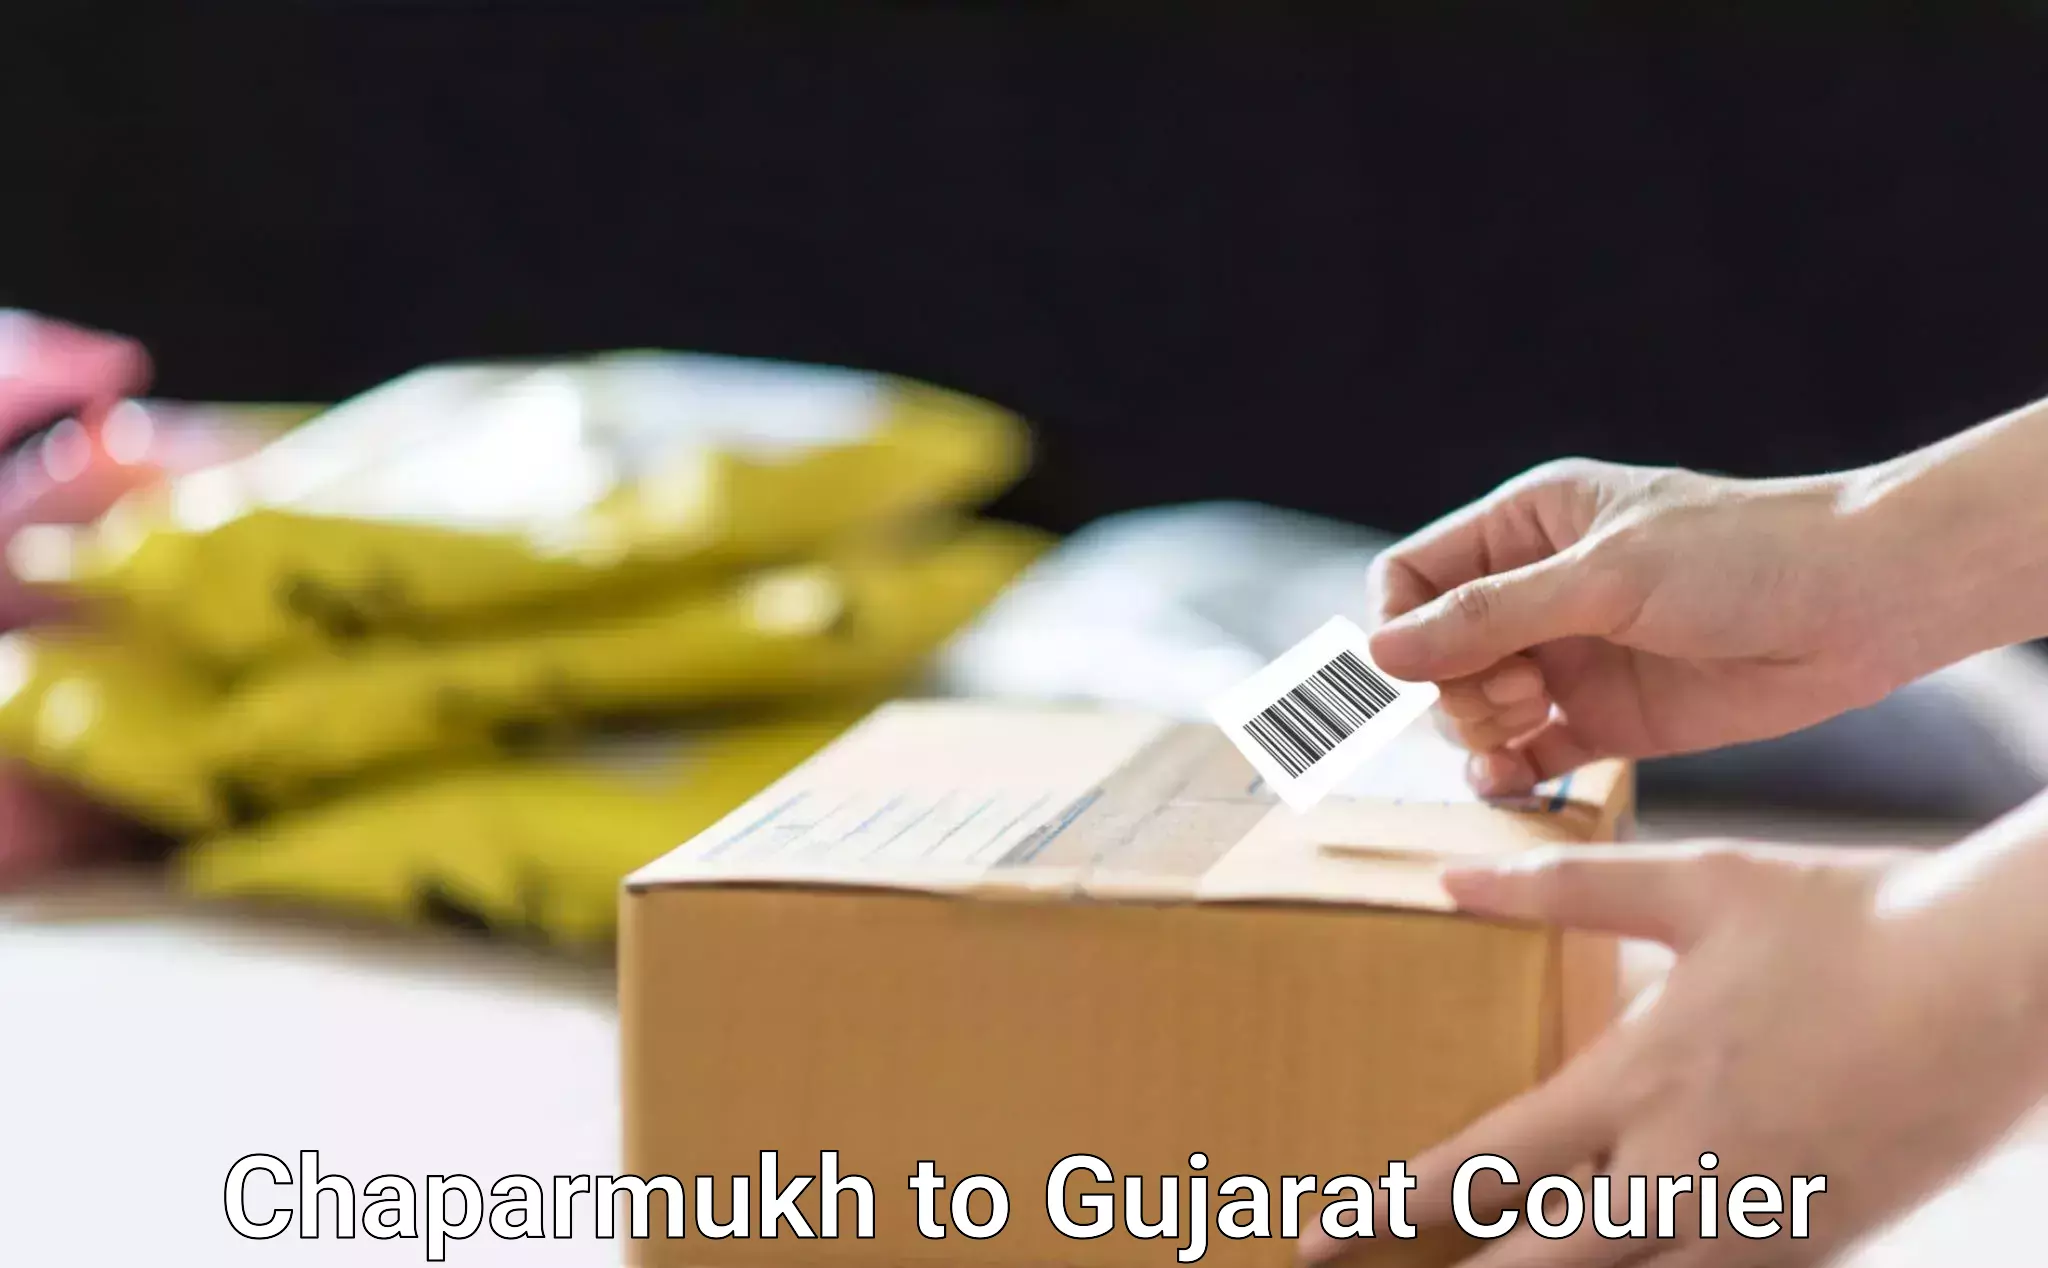 Modern courier technology Chaparmukh to Udhana